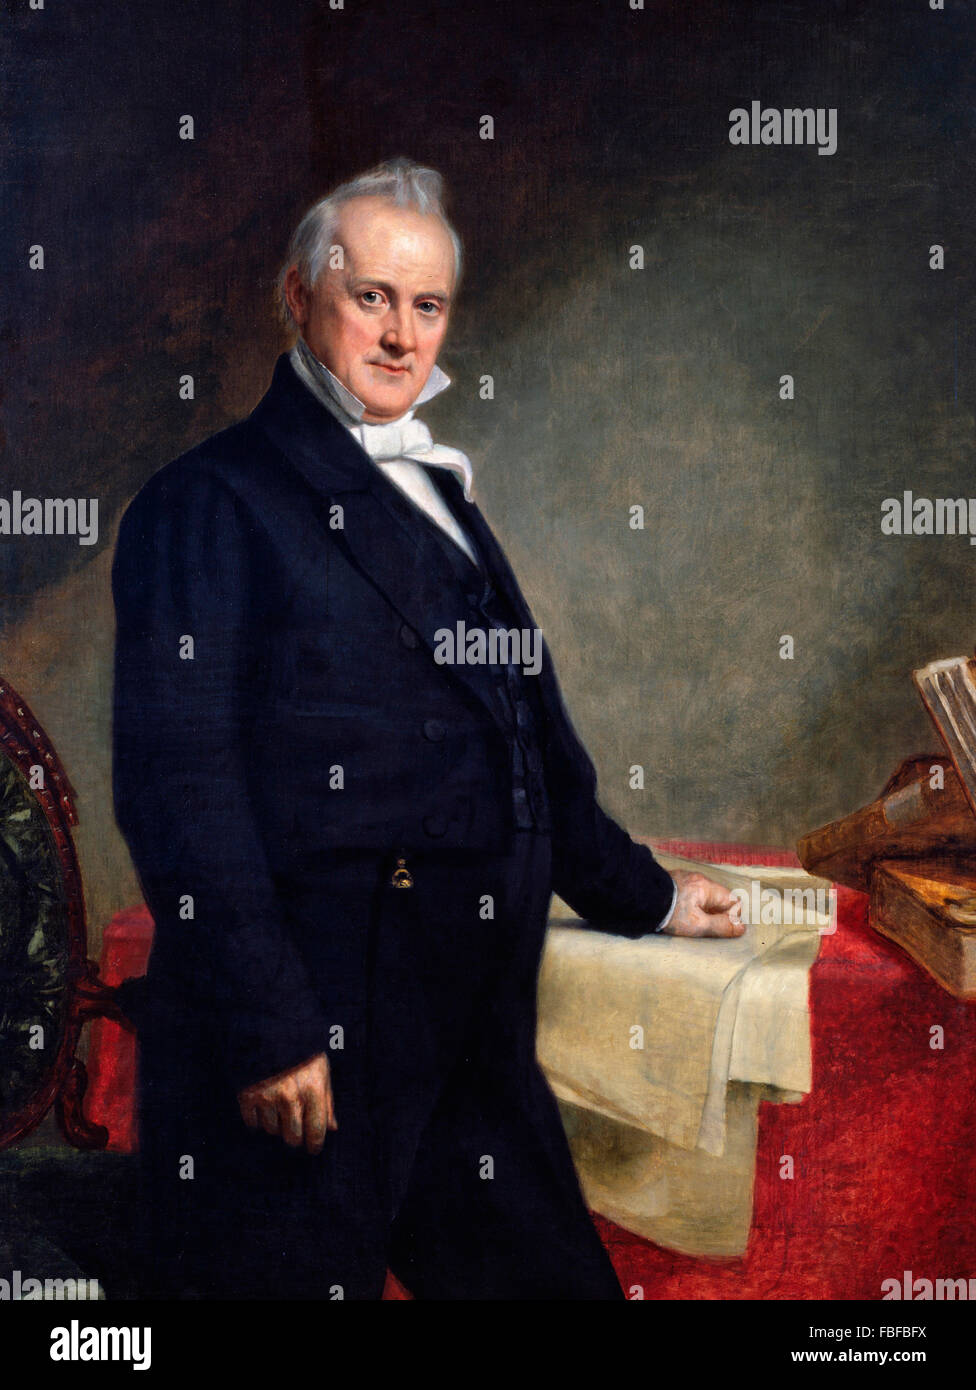 James Buchanan (1791-1868). Portrait of the 15th US President by George Peter Alexander Healy, 1859 Stock Photo